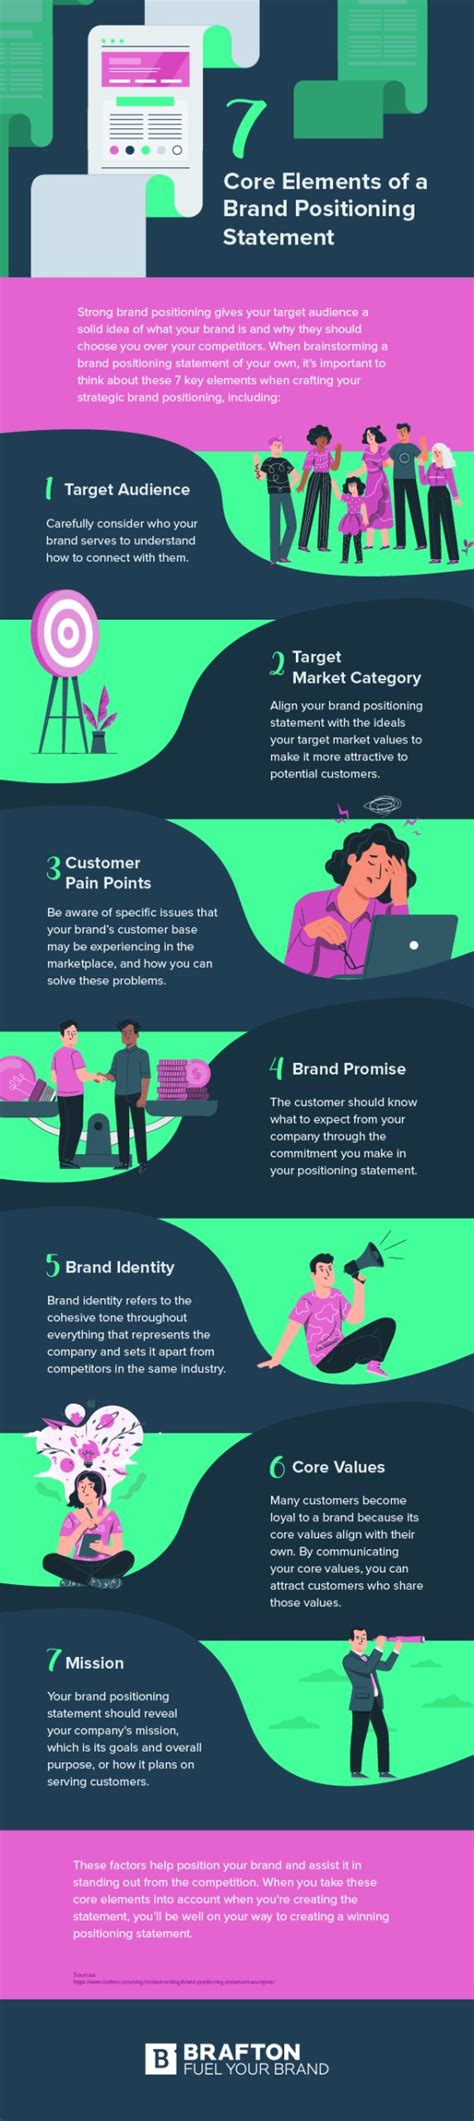 12 Brand Positioning Statement Examples and Why They Work (Infographic) - brafton